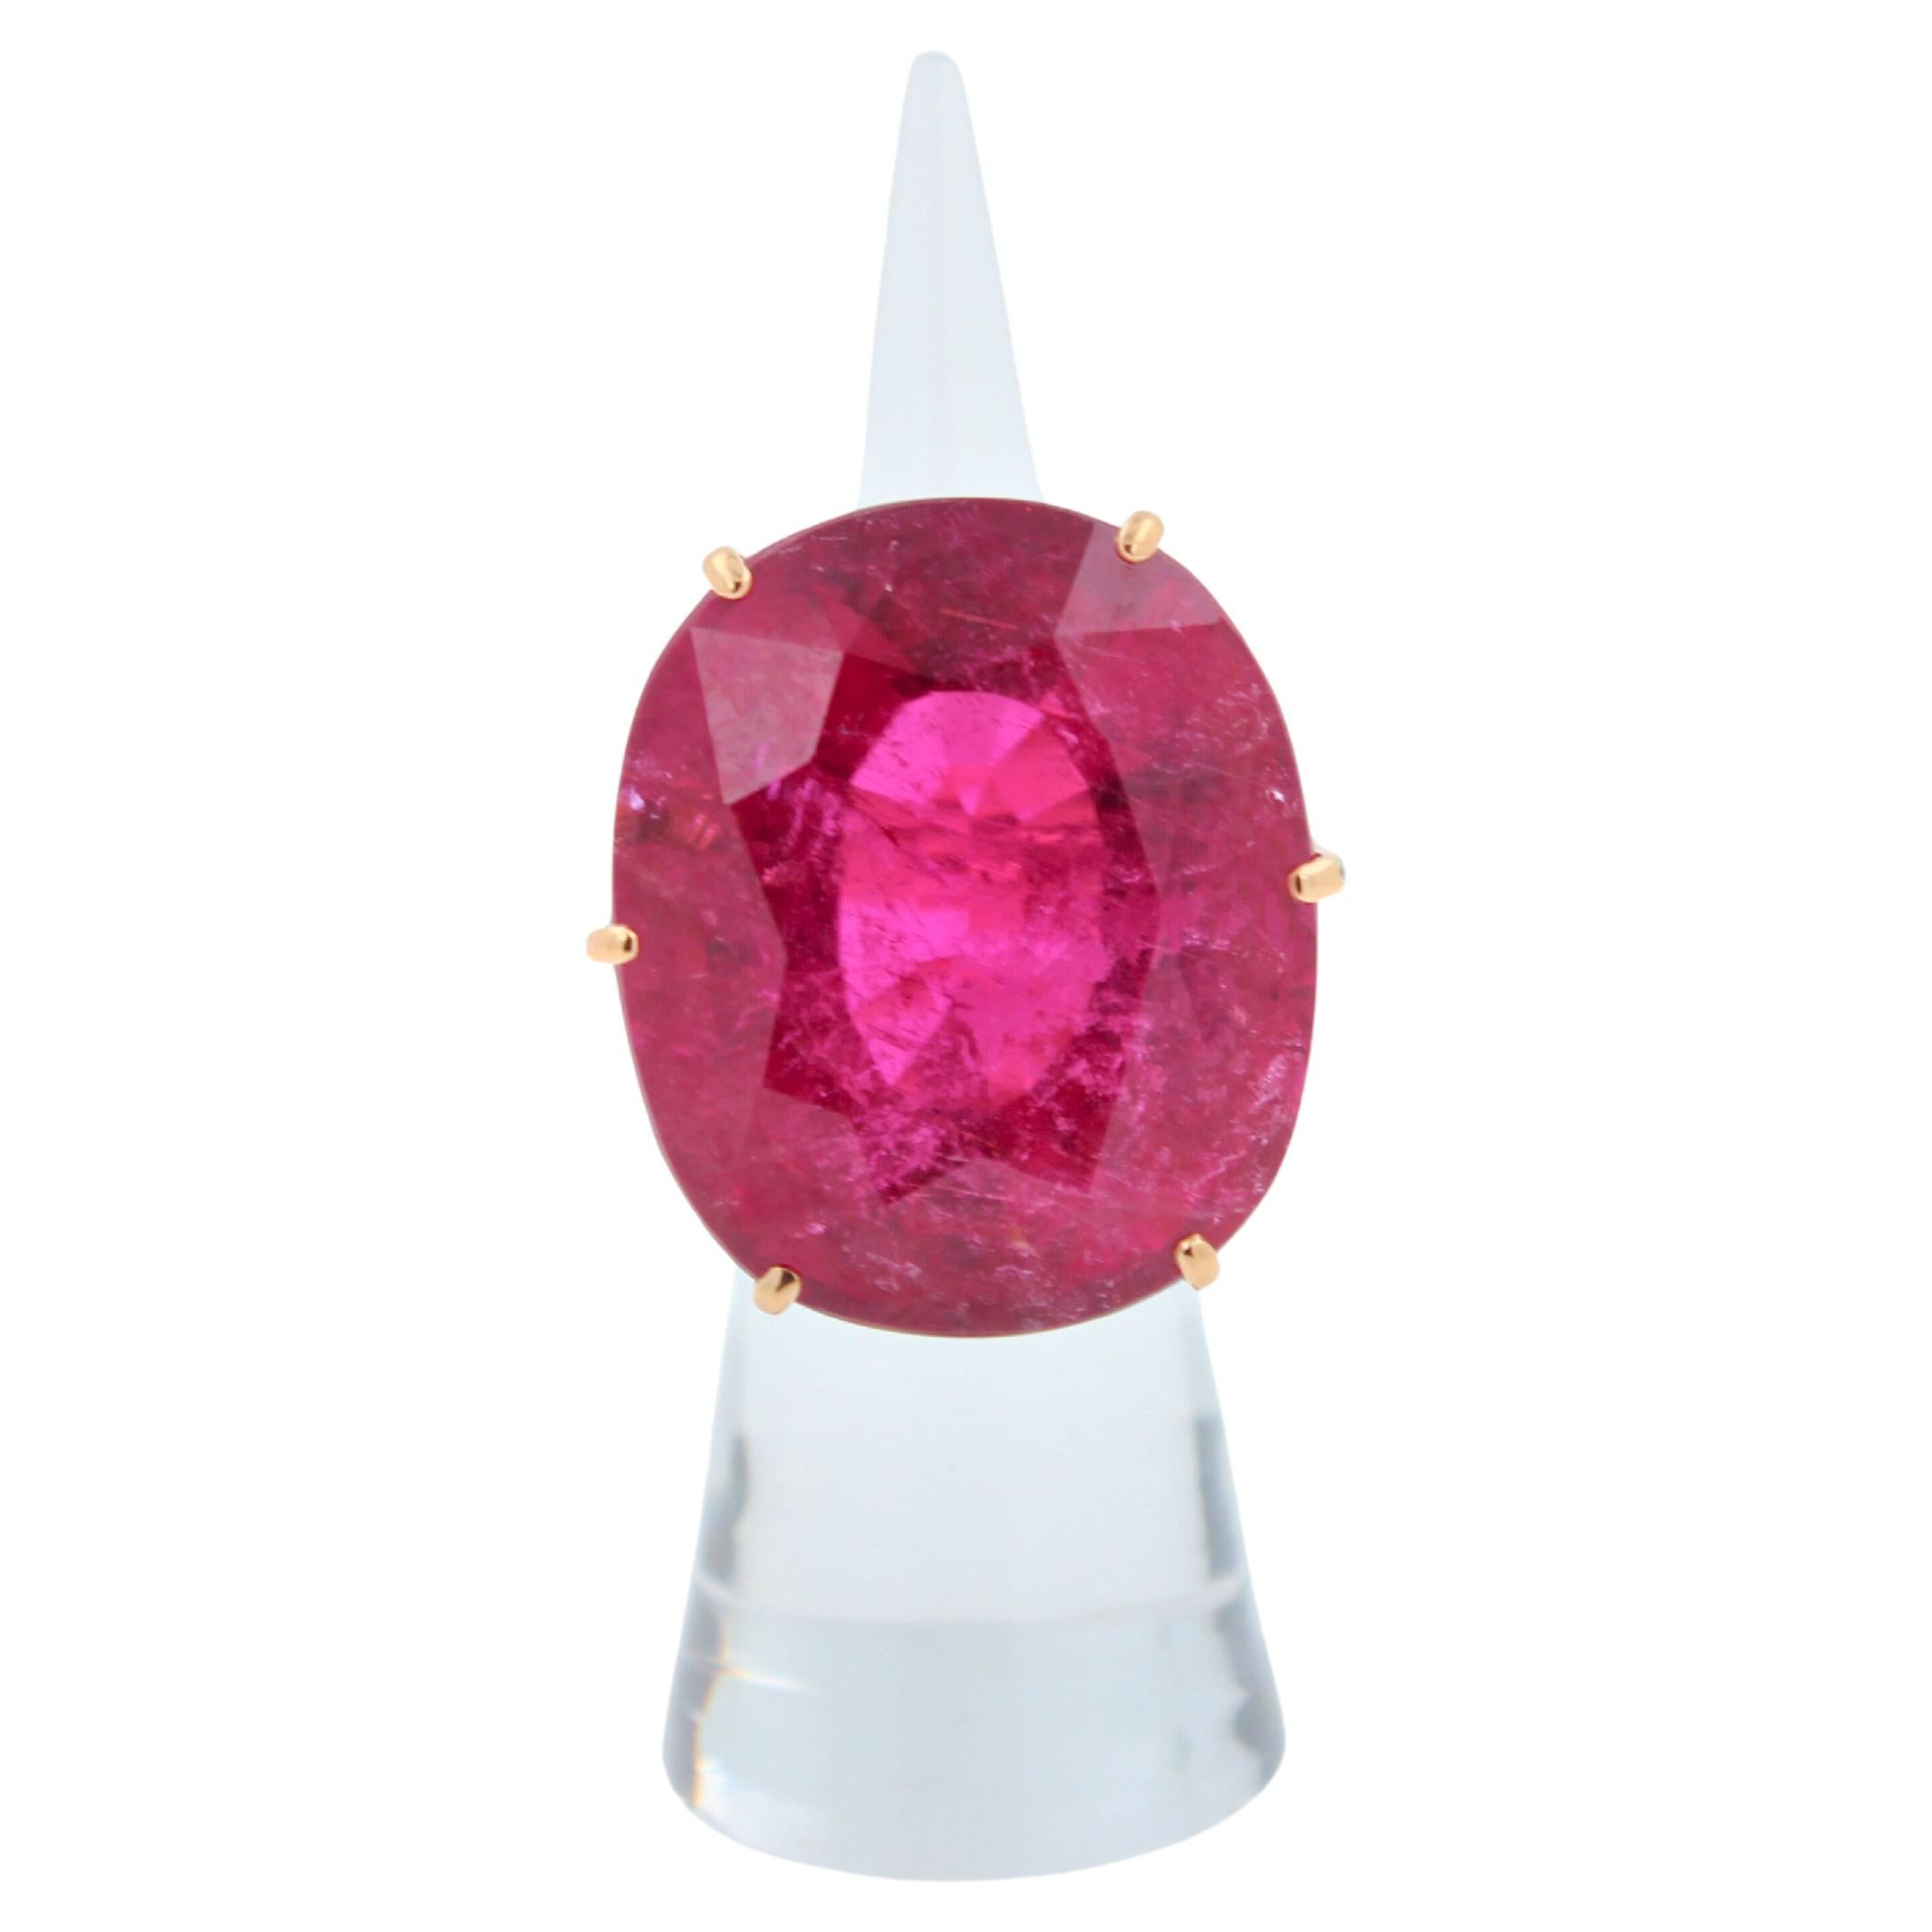 Huge Unique 110 Carats Red Pink Maroon Rubellite 18k Rose Gold Diamond Ring For Sale 6